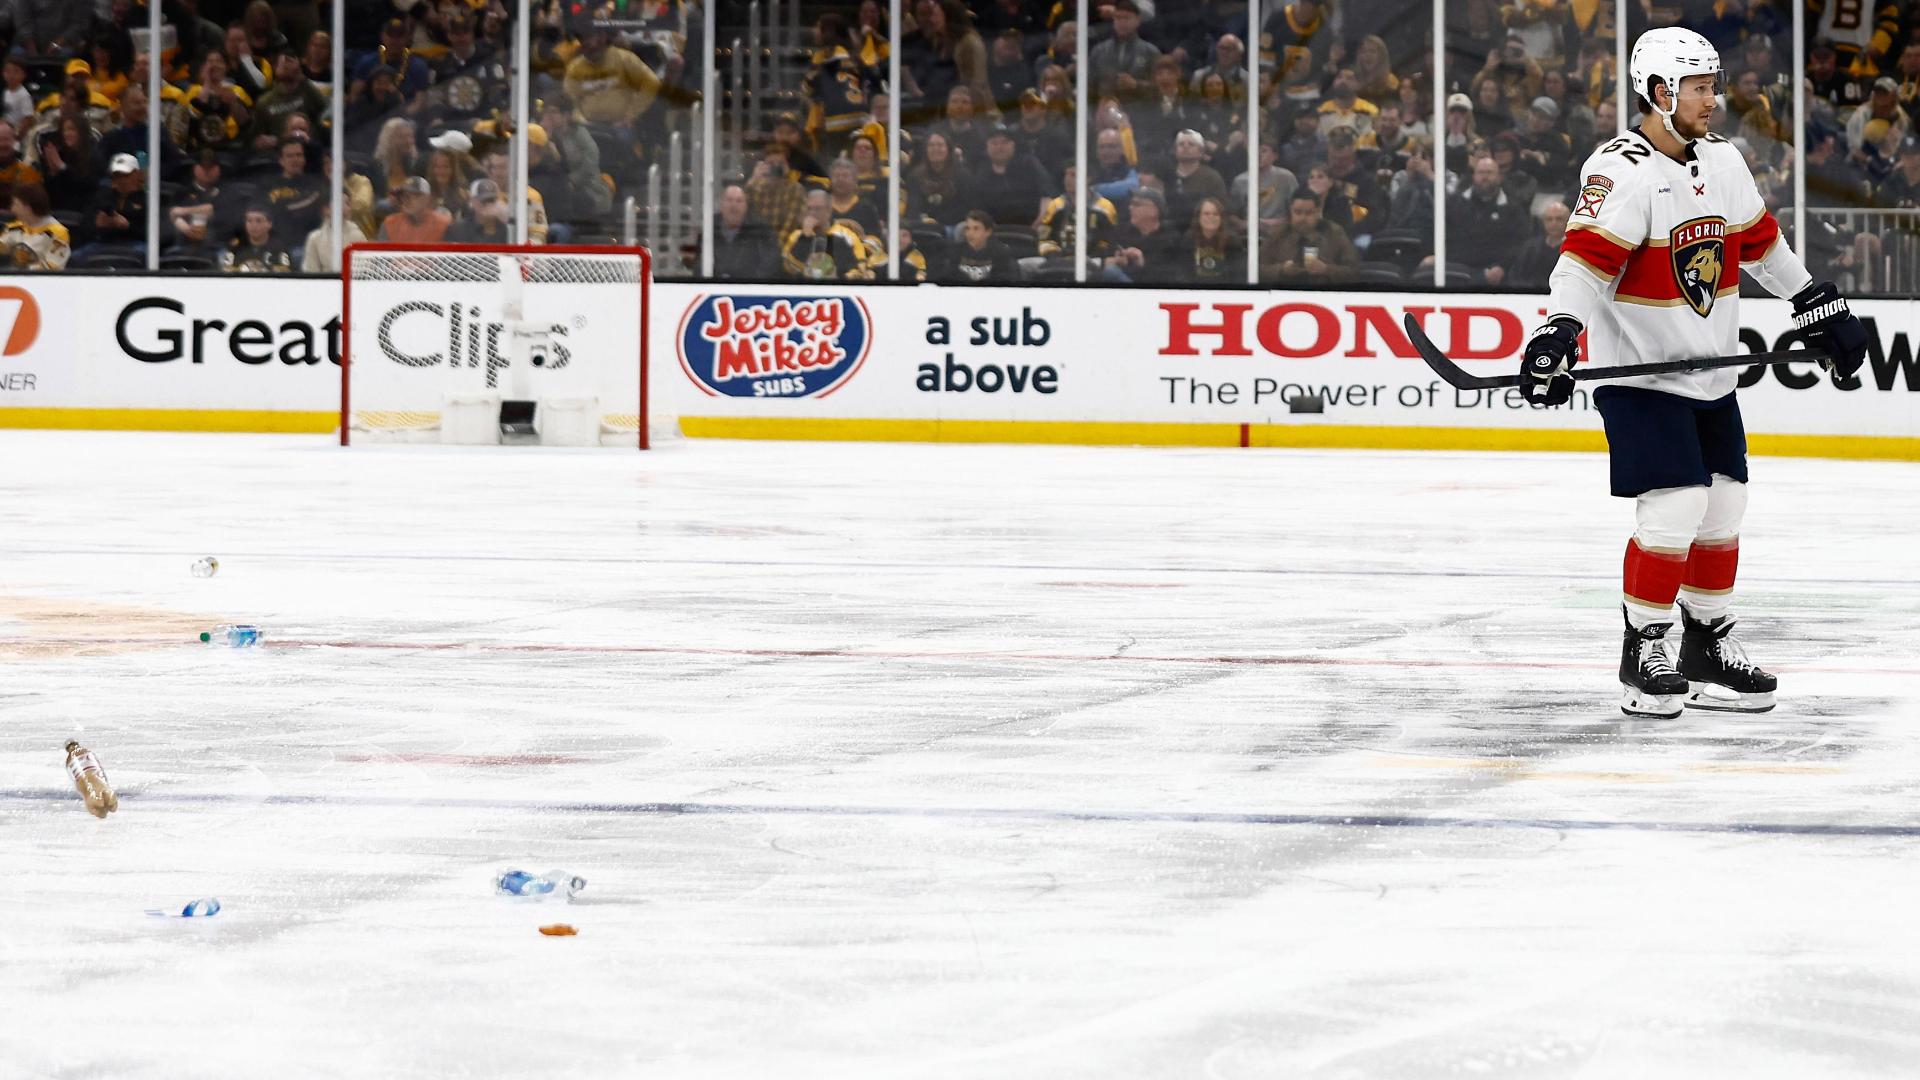 Trash thrown onto ice in Boston after questionable penalty call